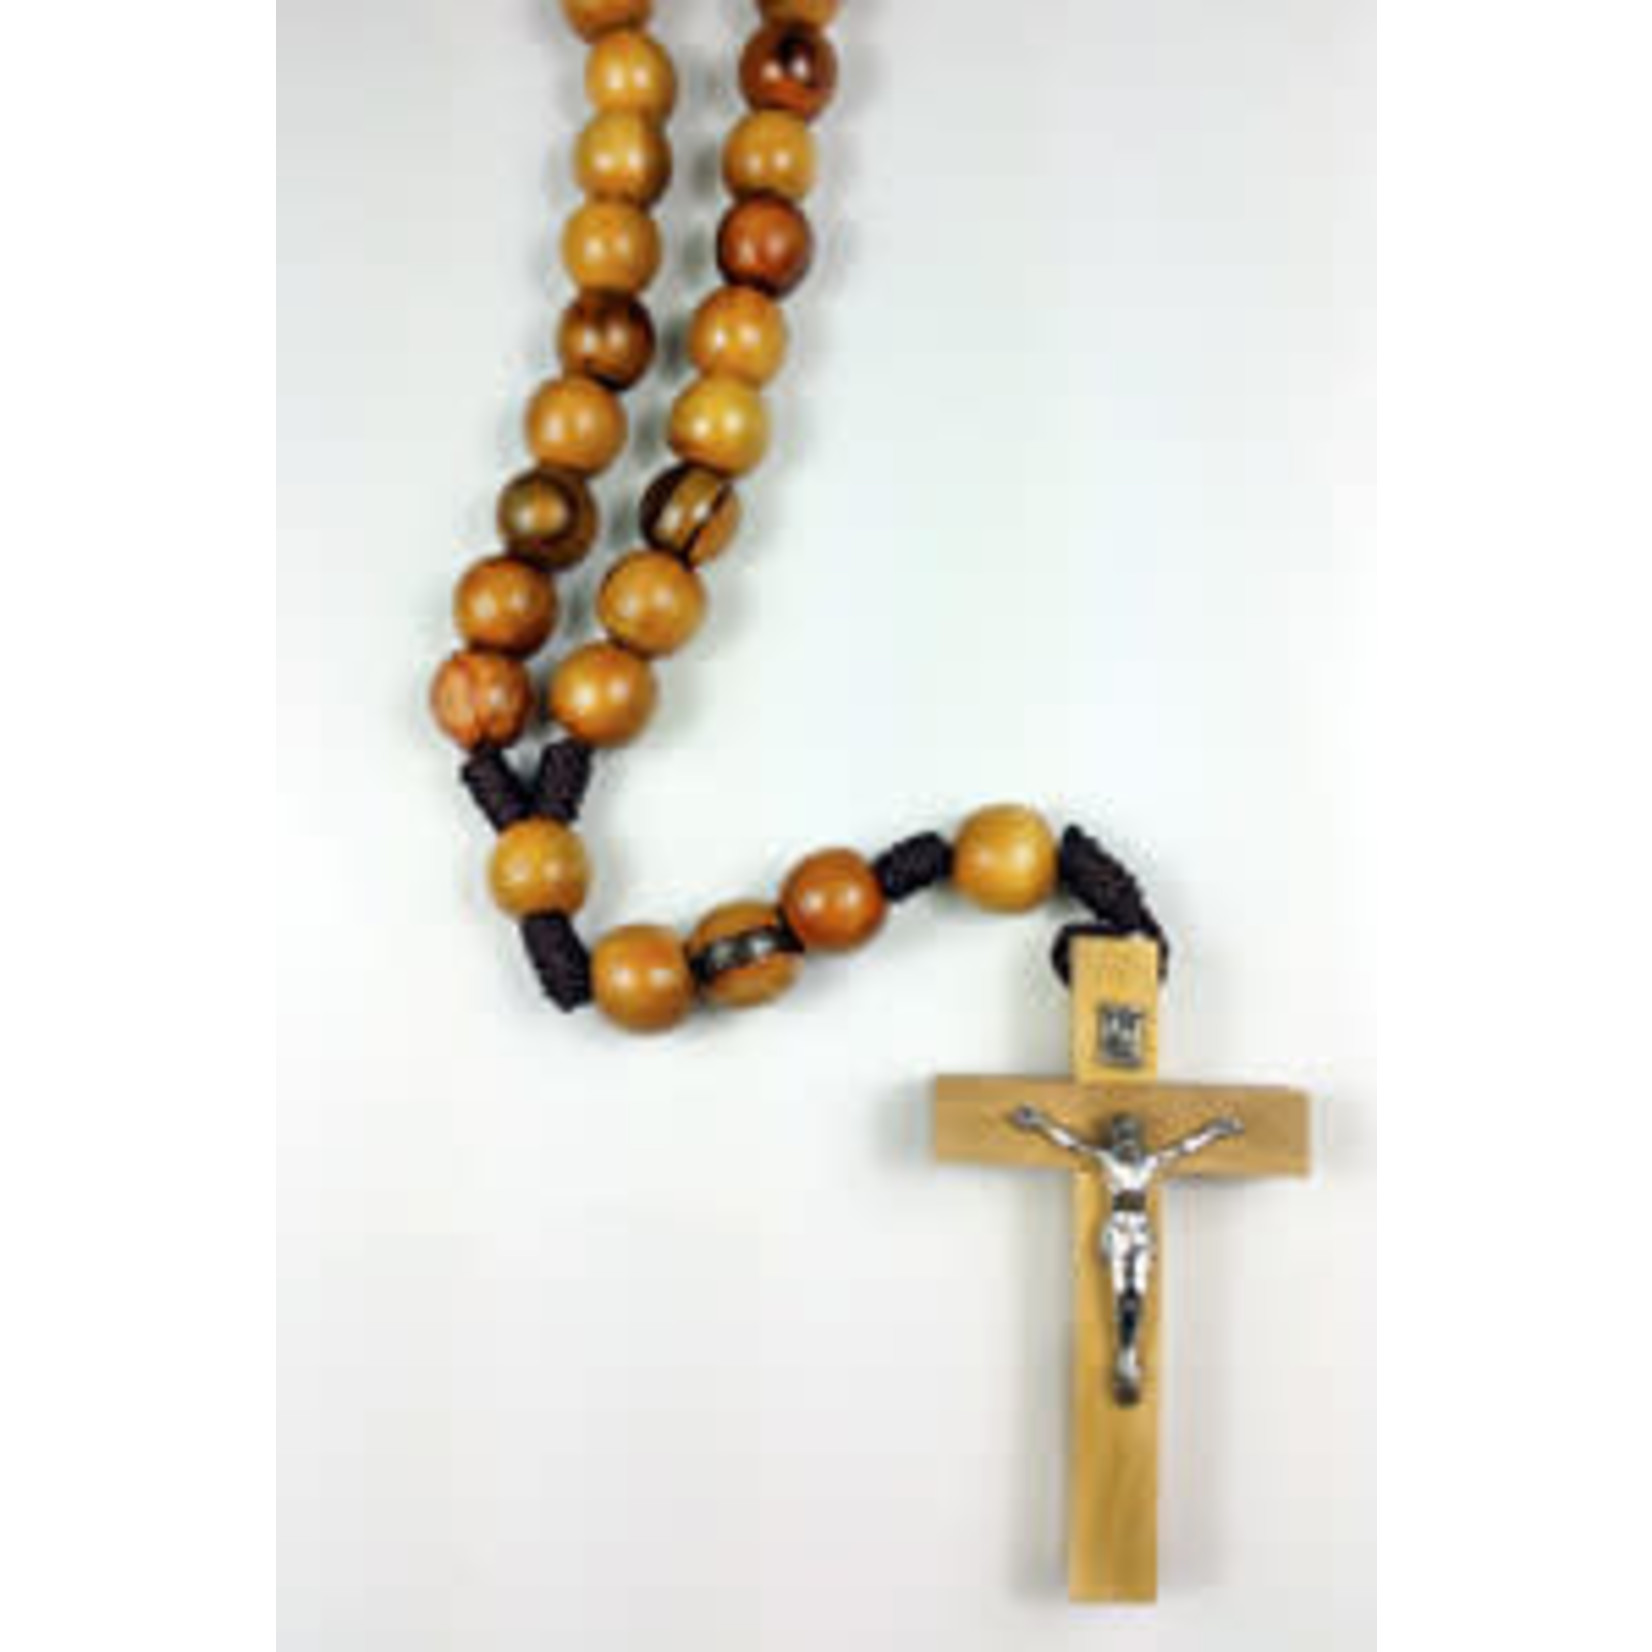 76 - LG OLIVEWOOD ROSARY ON CORD 10 mm